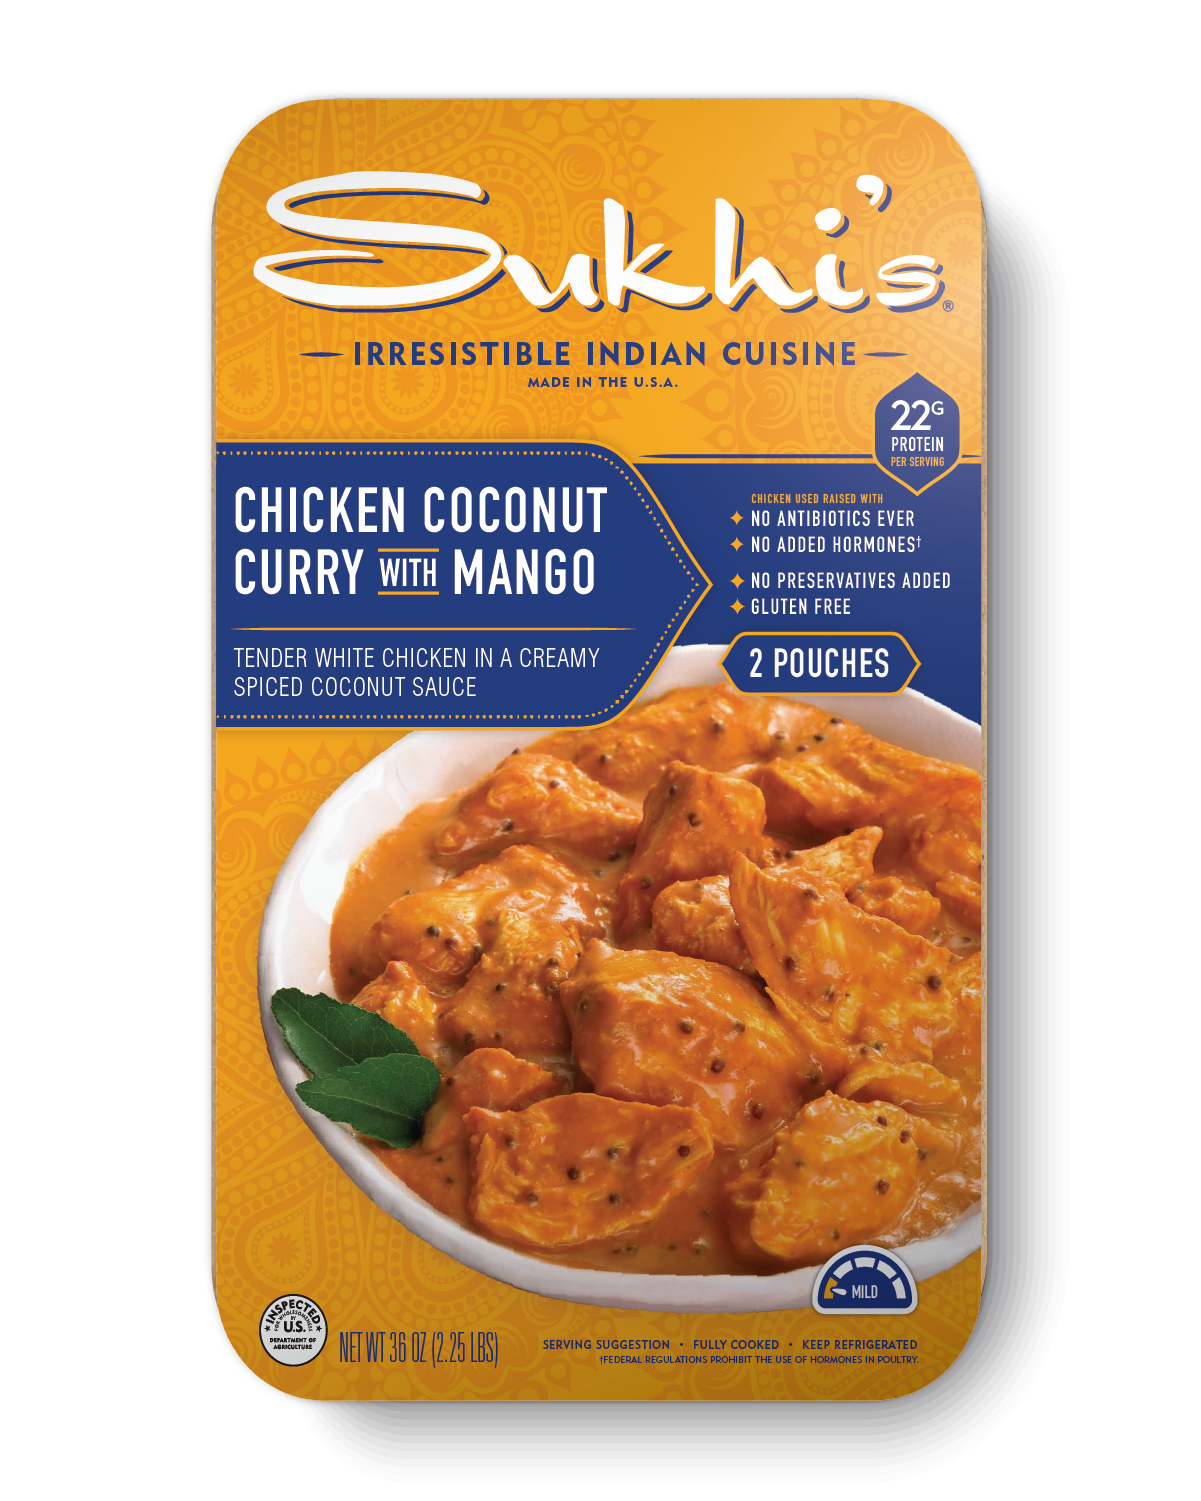 Chicken Coconut Curry with Mango - Family Size